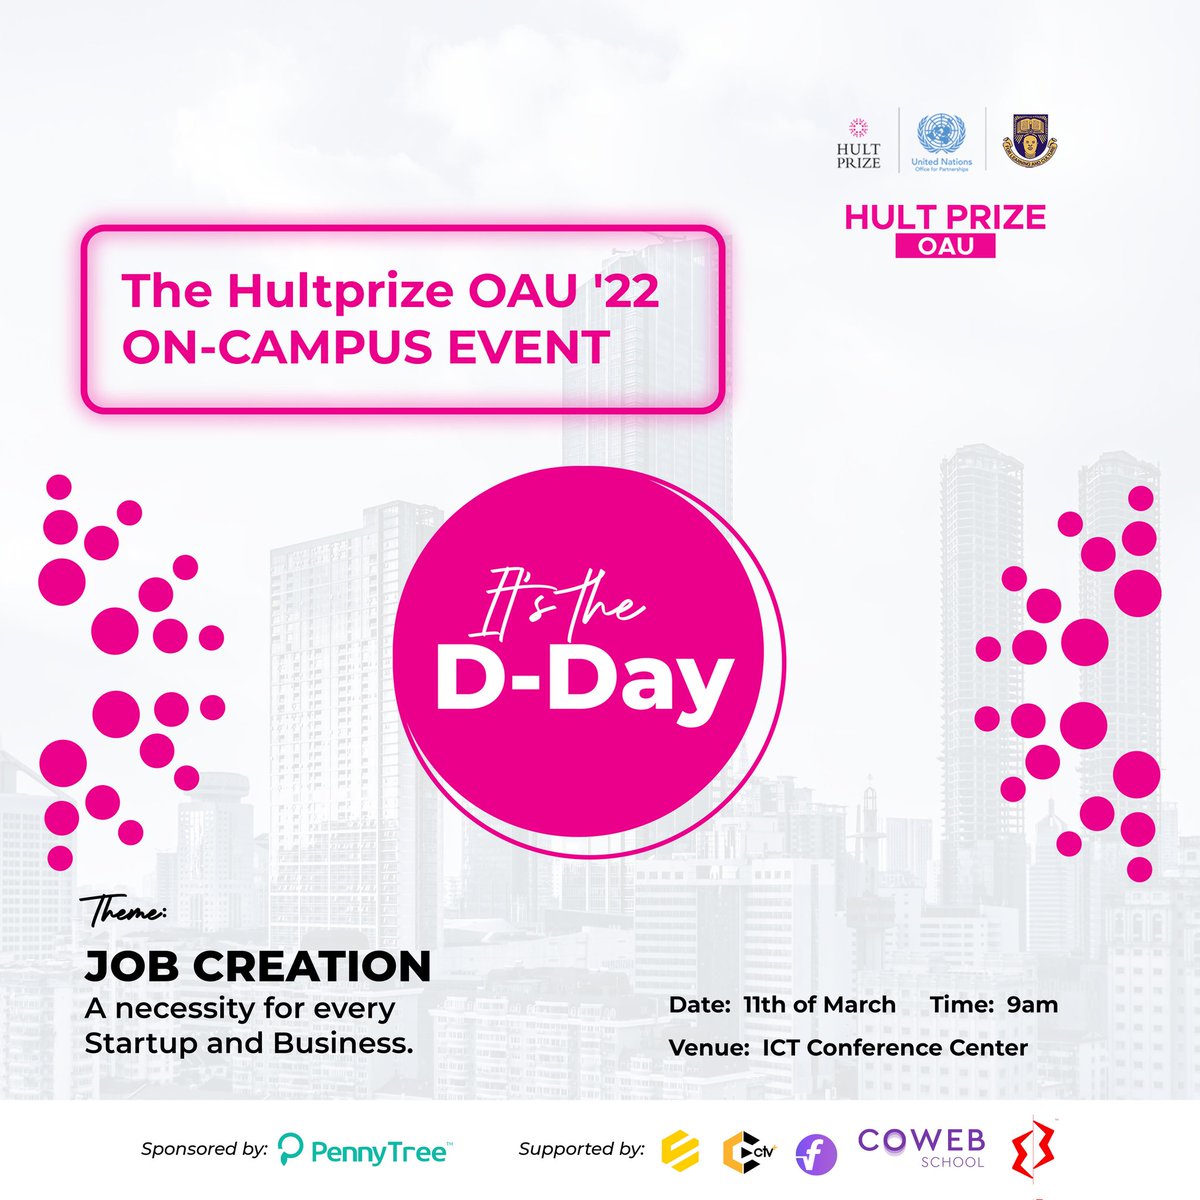 The D-Day is hereeeeee💃💃💃💃💃💃
Get ready to join us today at ICT Conference Hall , 9am Prompt
You sure wouldn't want to miss 
@HultPrize_OAU has alottttt in stock for you🔊🔊🤤
#HultPrize
#HultPrizeOAU
#OAUEvents